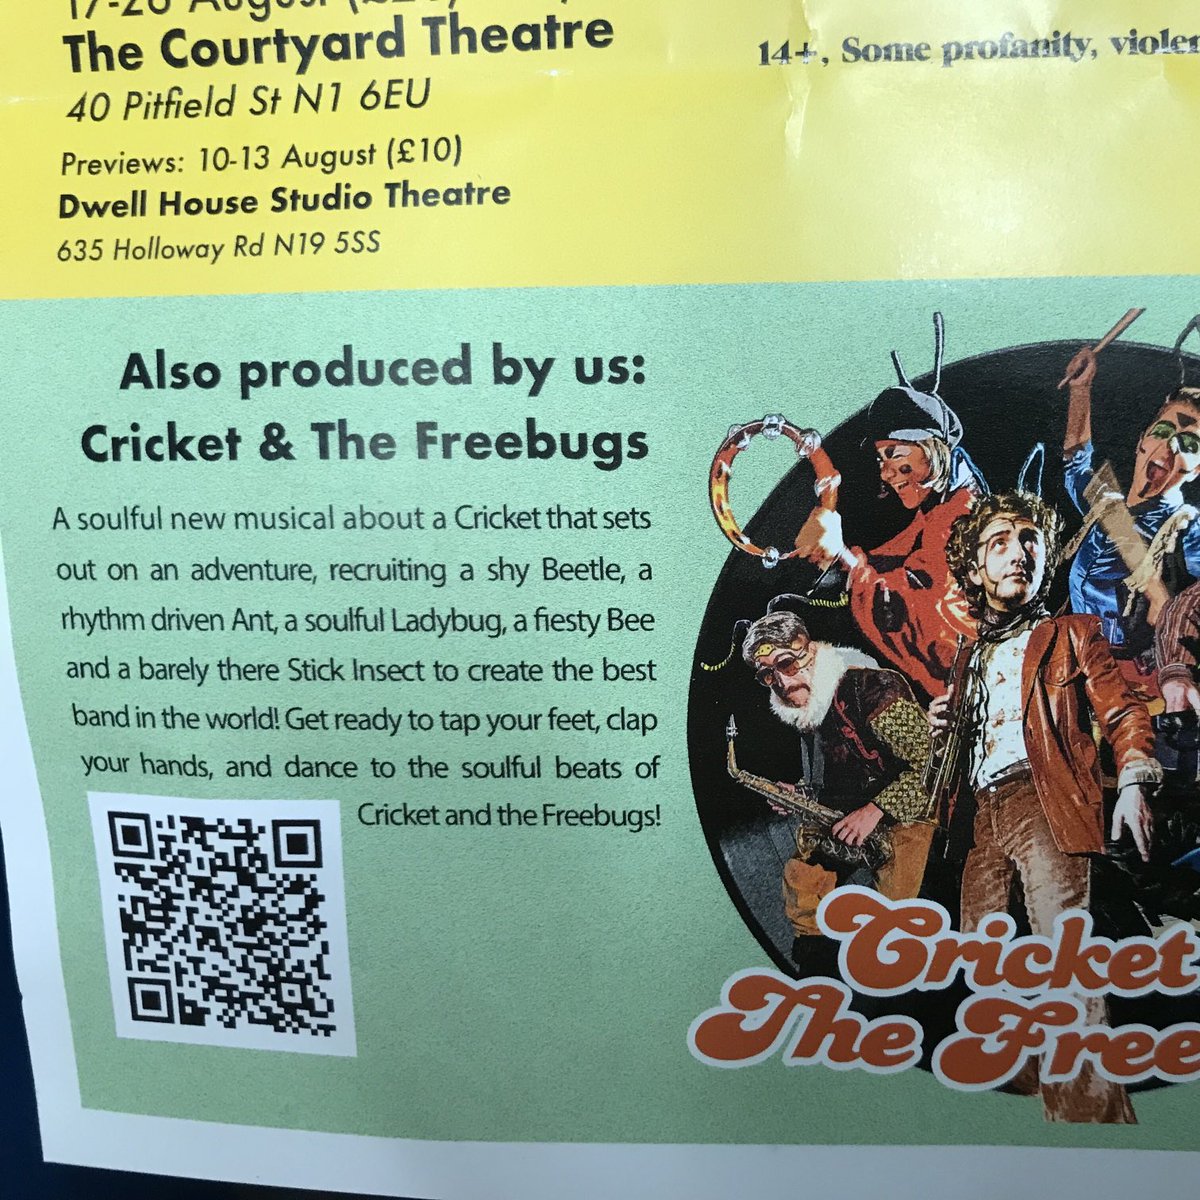 Cricket and The Freebugs! Loved this show! For little and big kids. You will leave feeling joyous 😀 ⁦@CamdenFringe⁩